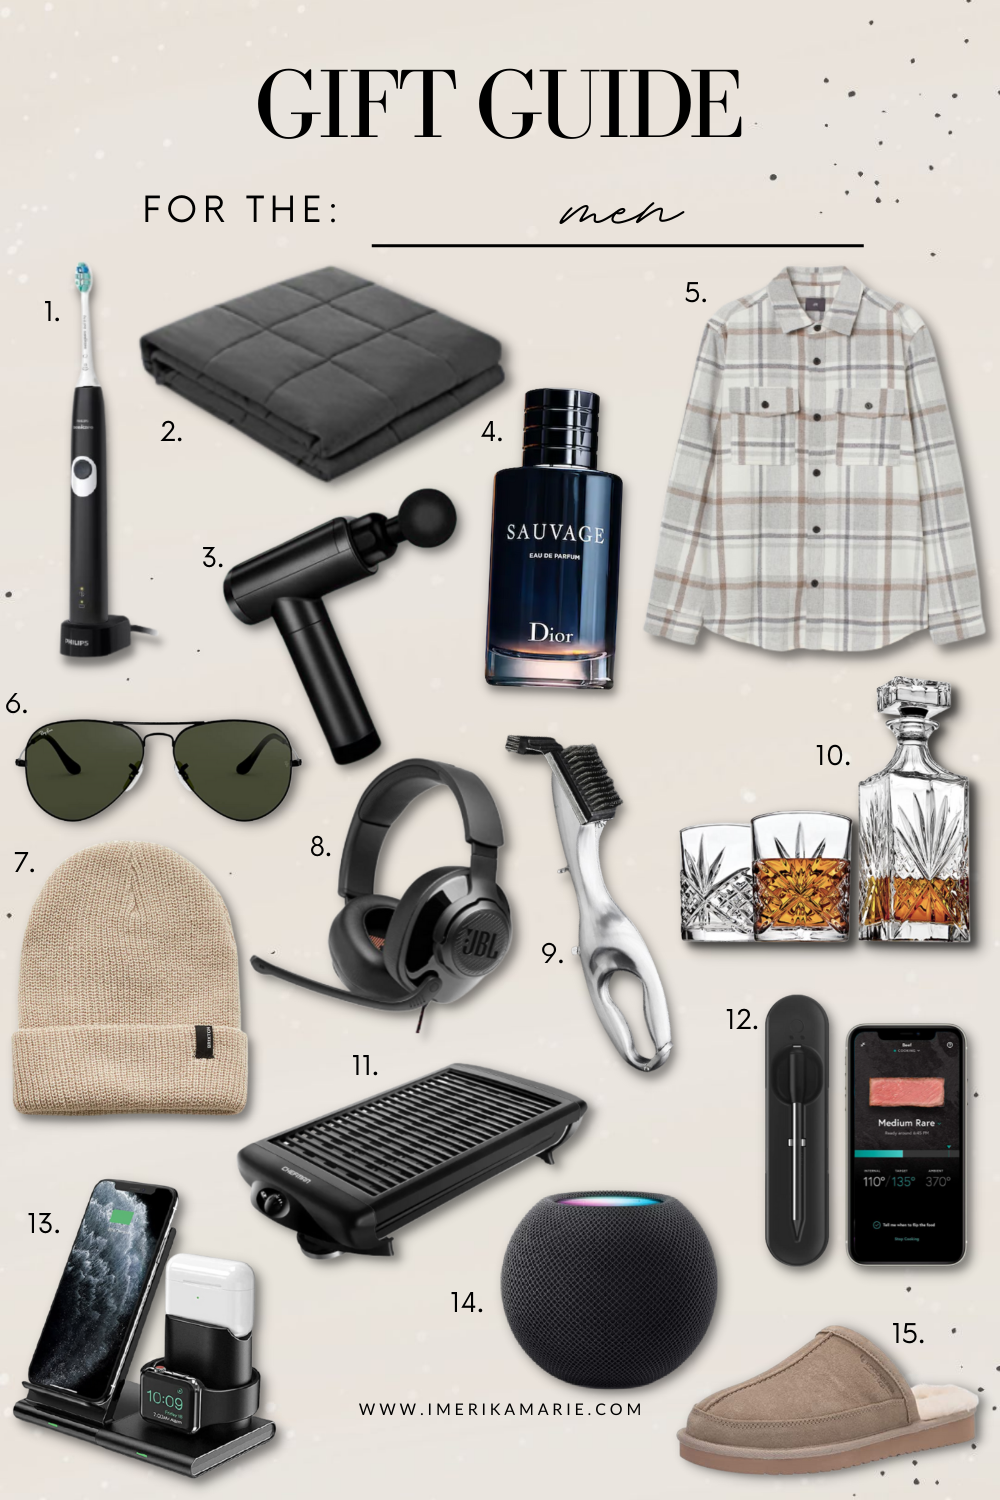 GIFT GUIDE for him